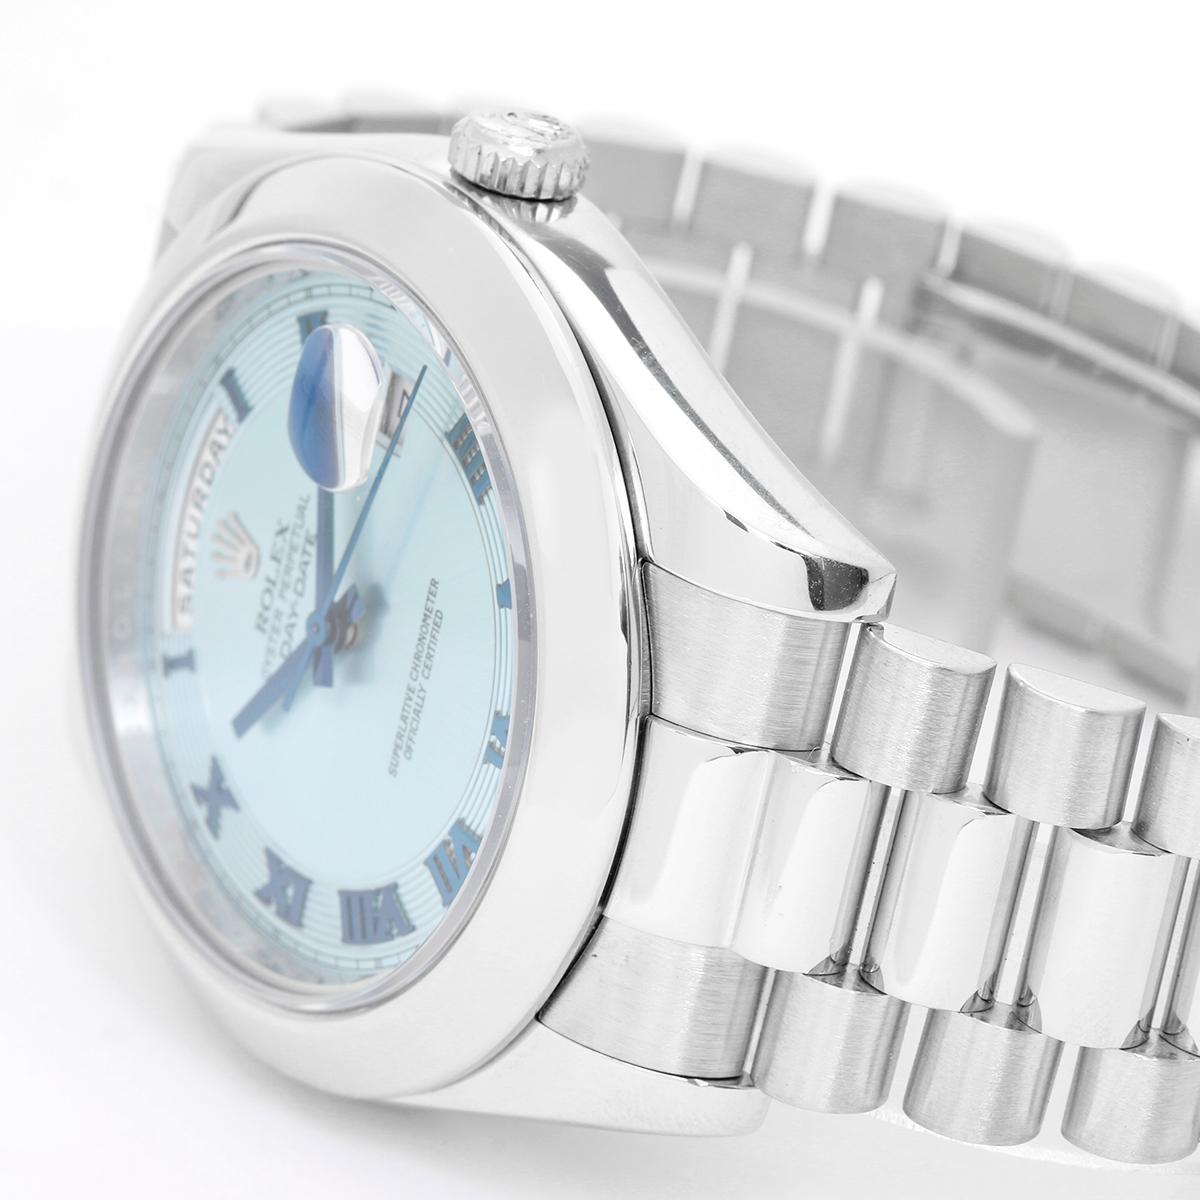 Rolex Day-Date II President Men's Platinum Watch Glacier Blue Dial with Roman Numerals 218206

Rolex Day-Date II President Men's Platinum Watch Glacier Blue Dial with Roman Numerals 218206 -  Automatic winding with day and date; 31 jewels; sapphire